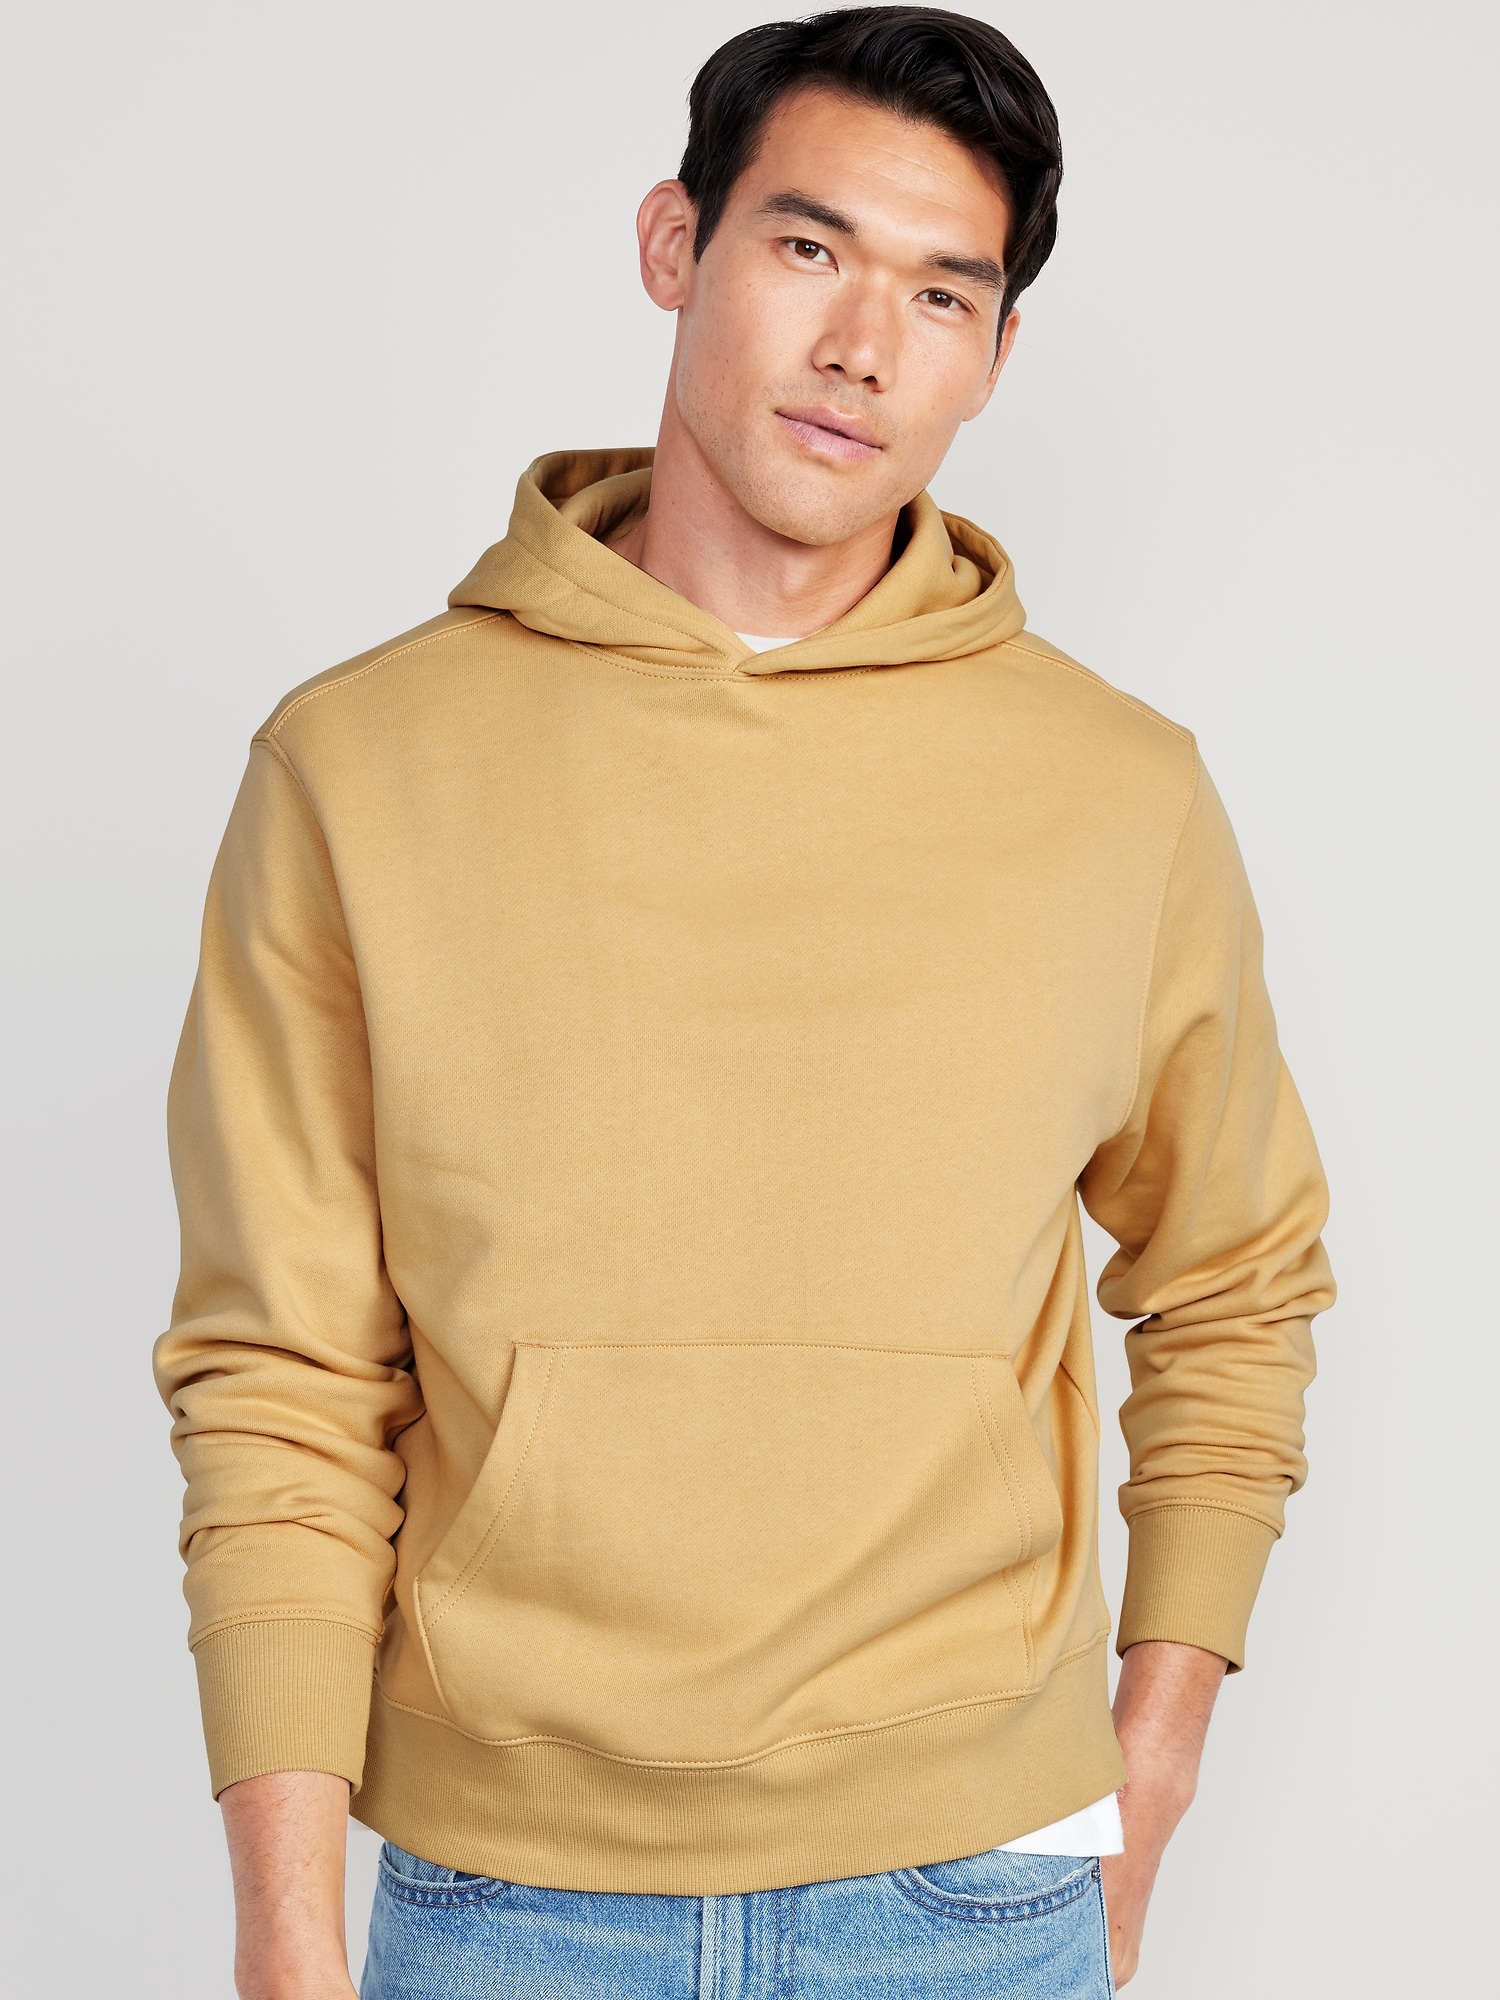 Old Navy Pullover Hoodie for Men yellow. 1